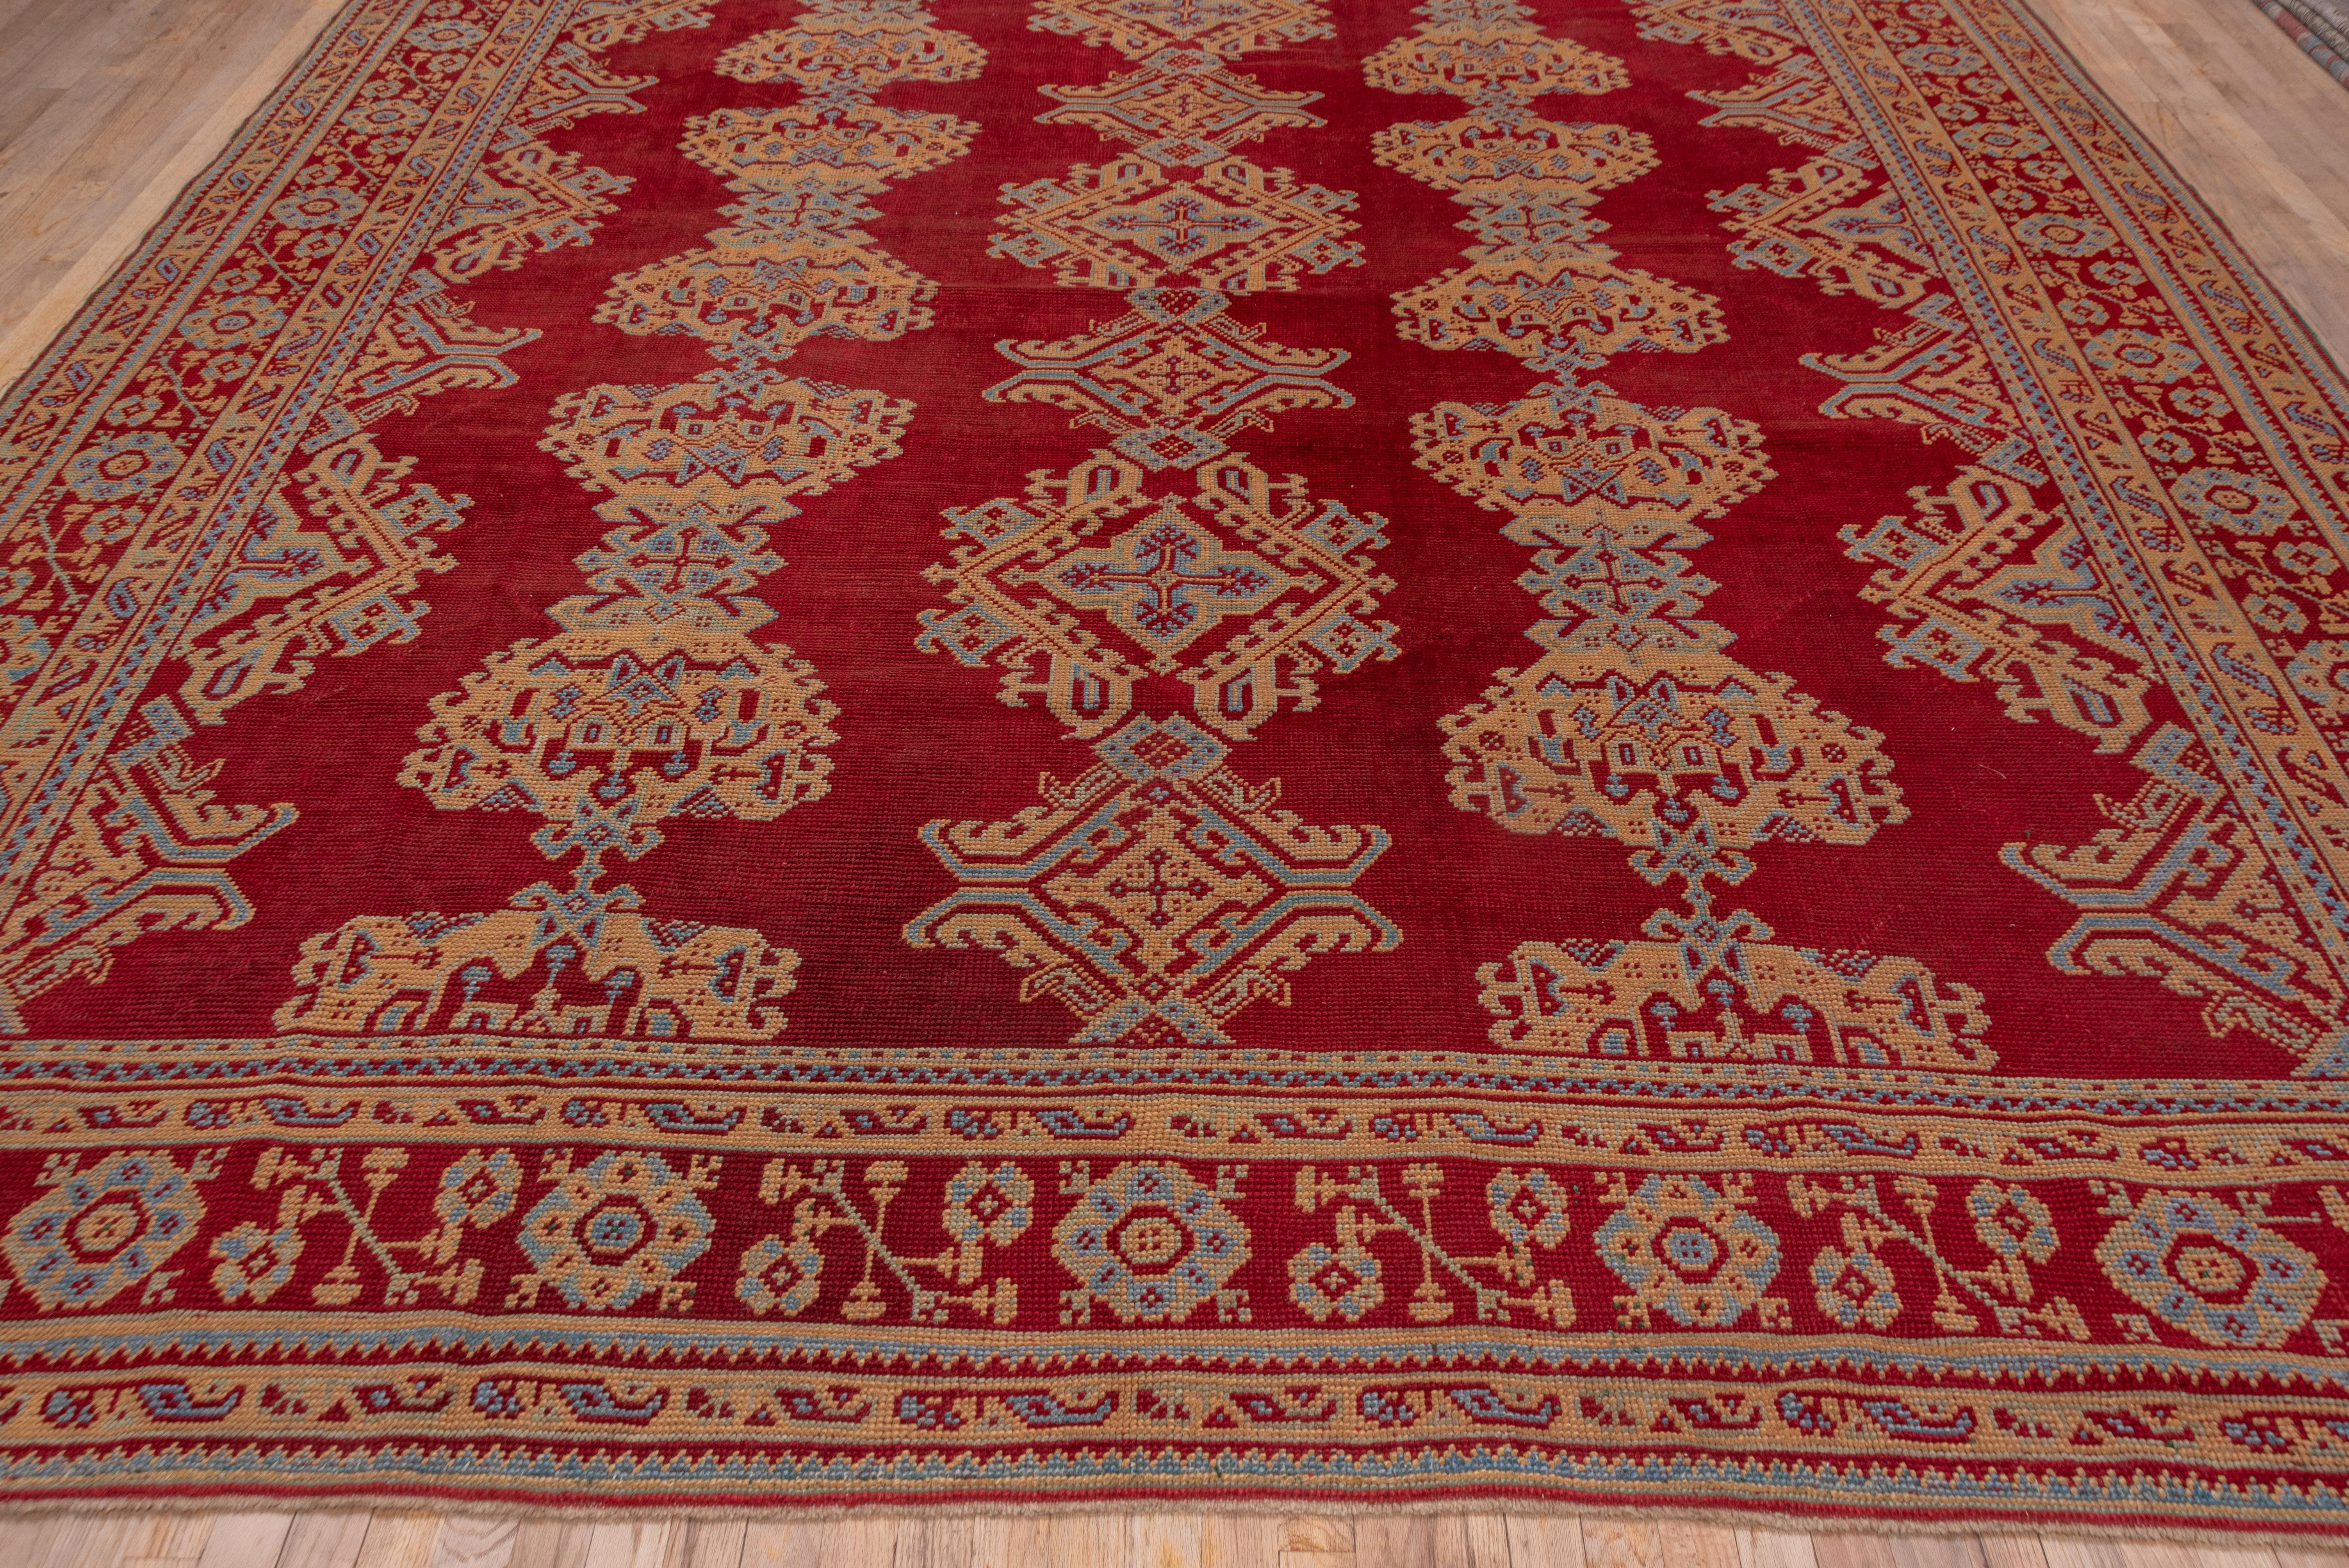 Turkish Antique Red Oushak Rug with Orange & Blue Borders, Circa 1920s For Sale